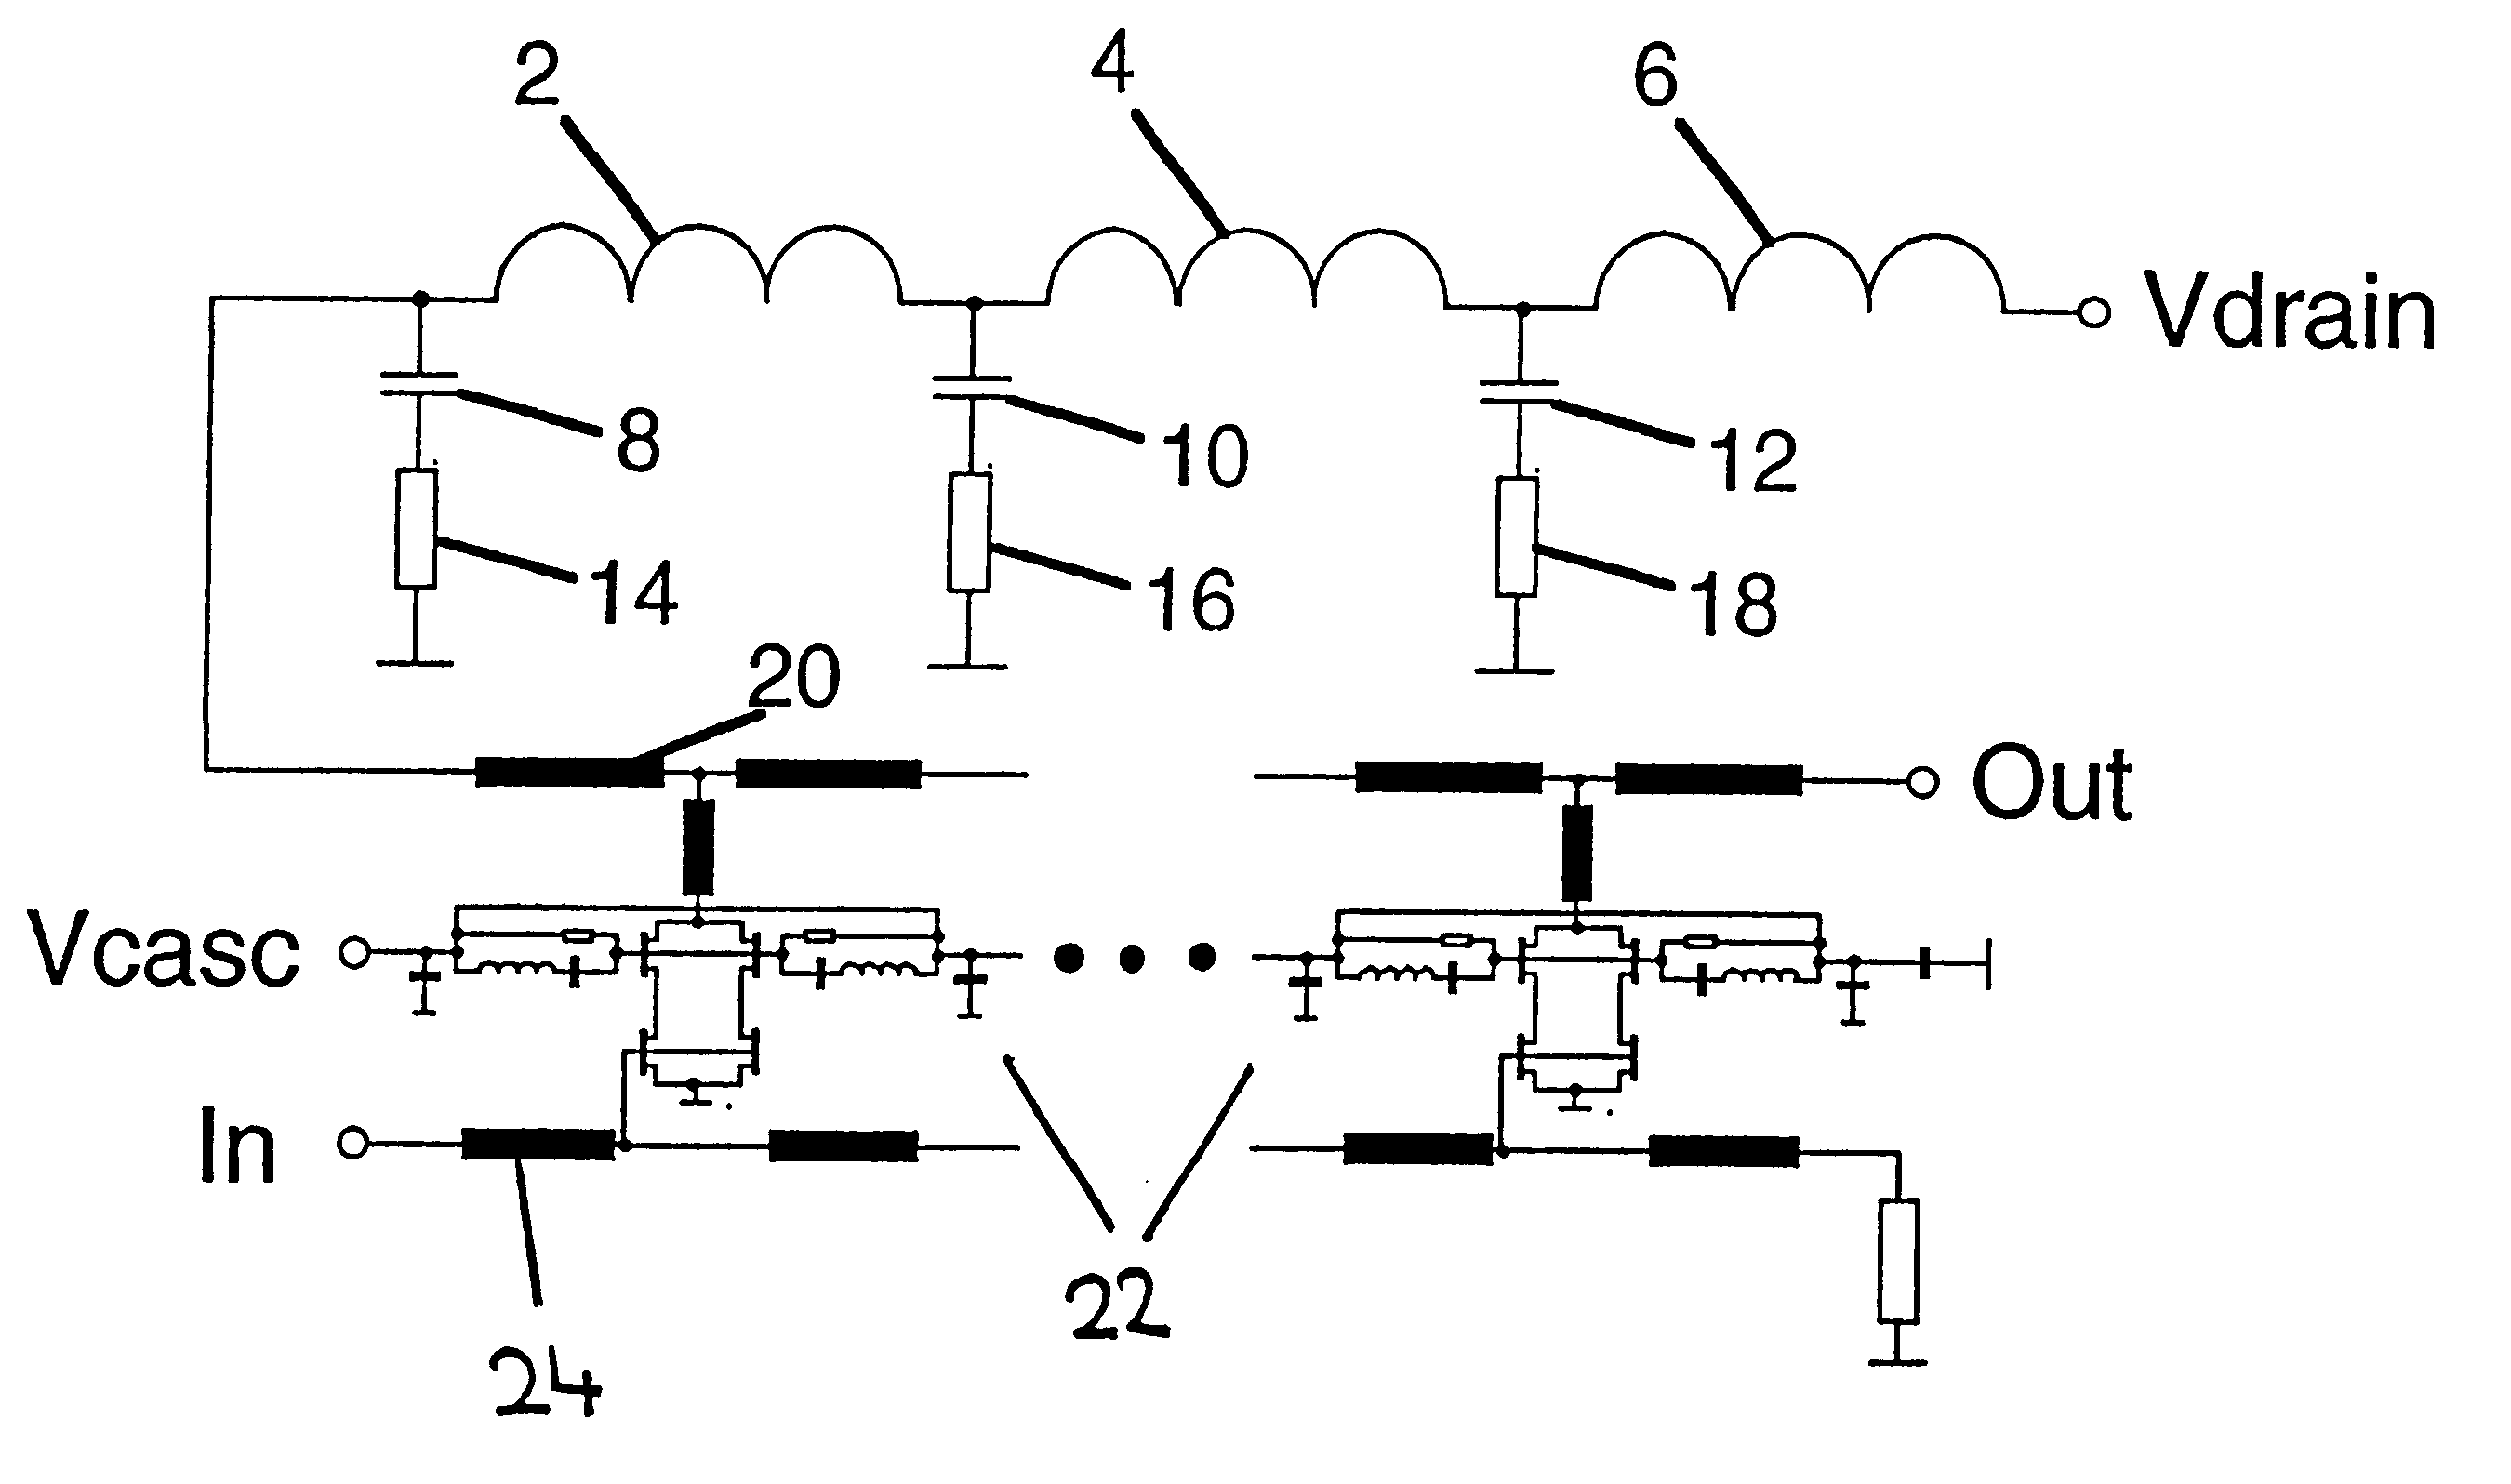 Supply voltage decoupling device for HF amplifier circuits